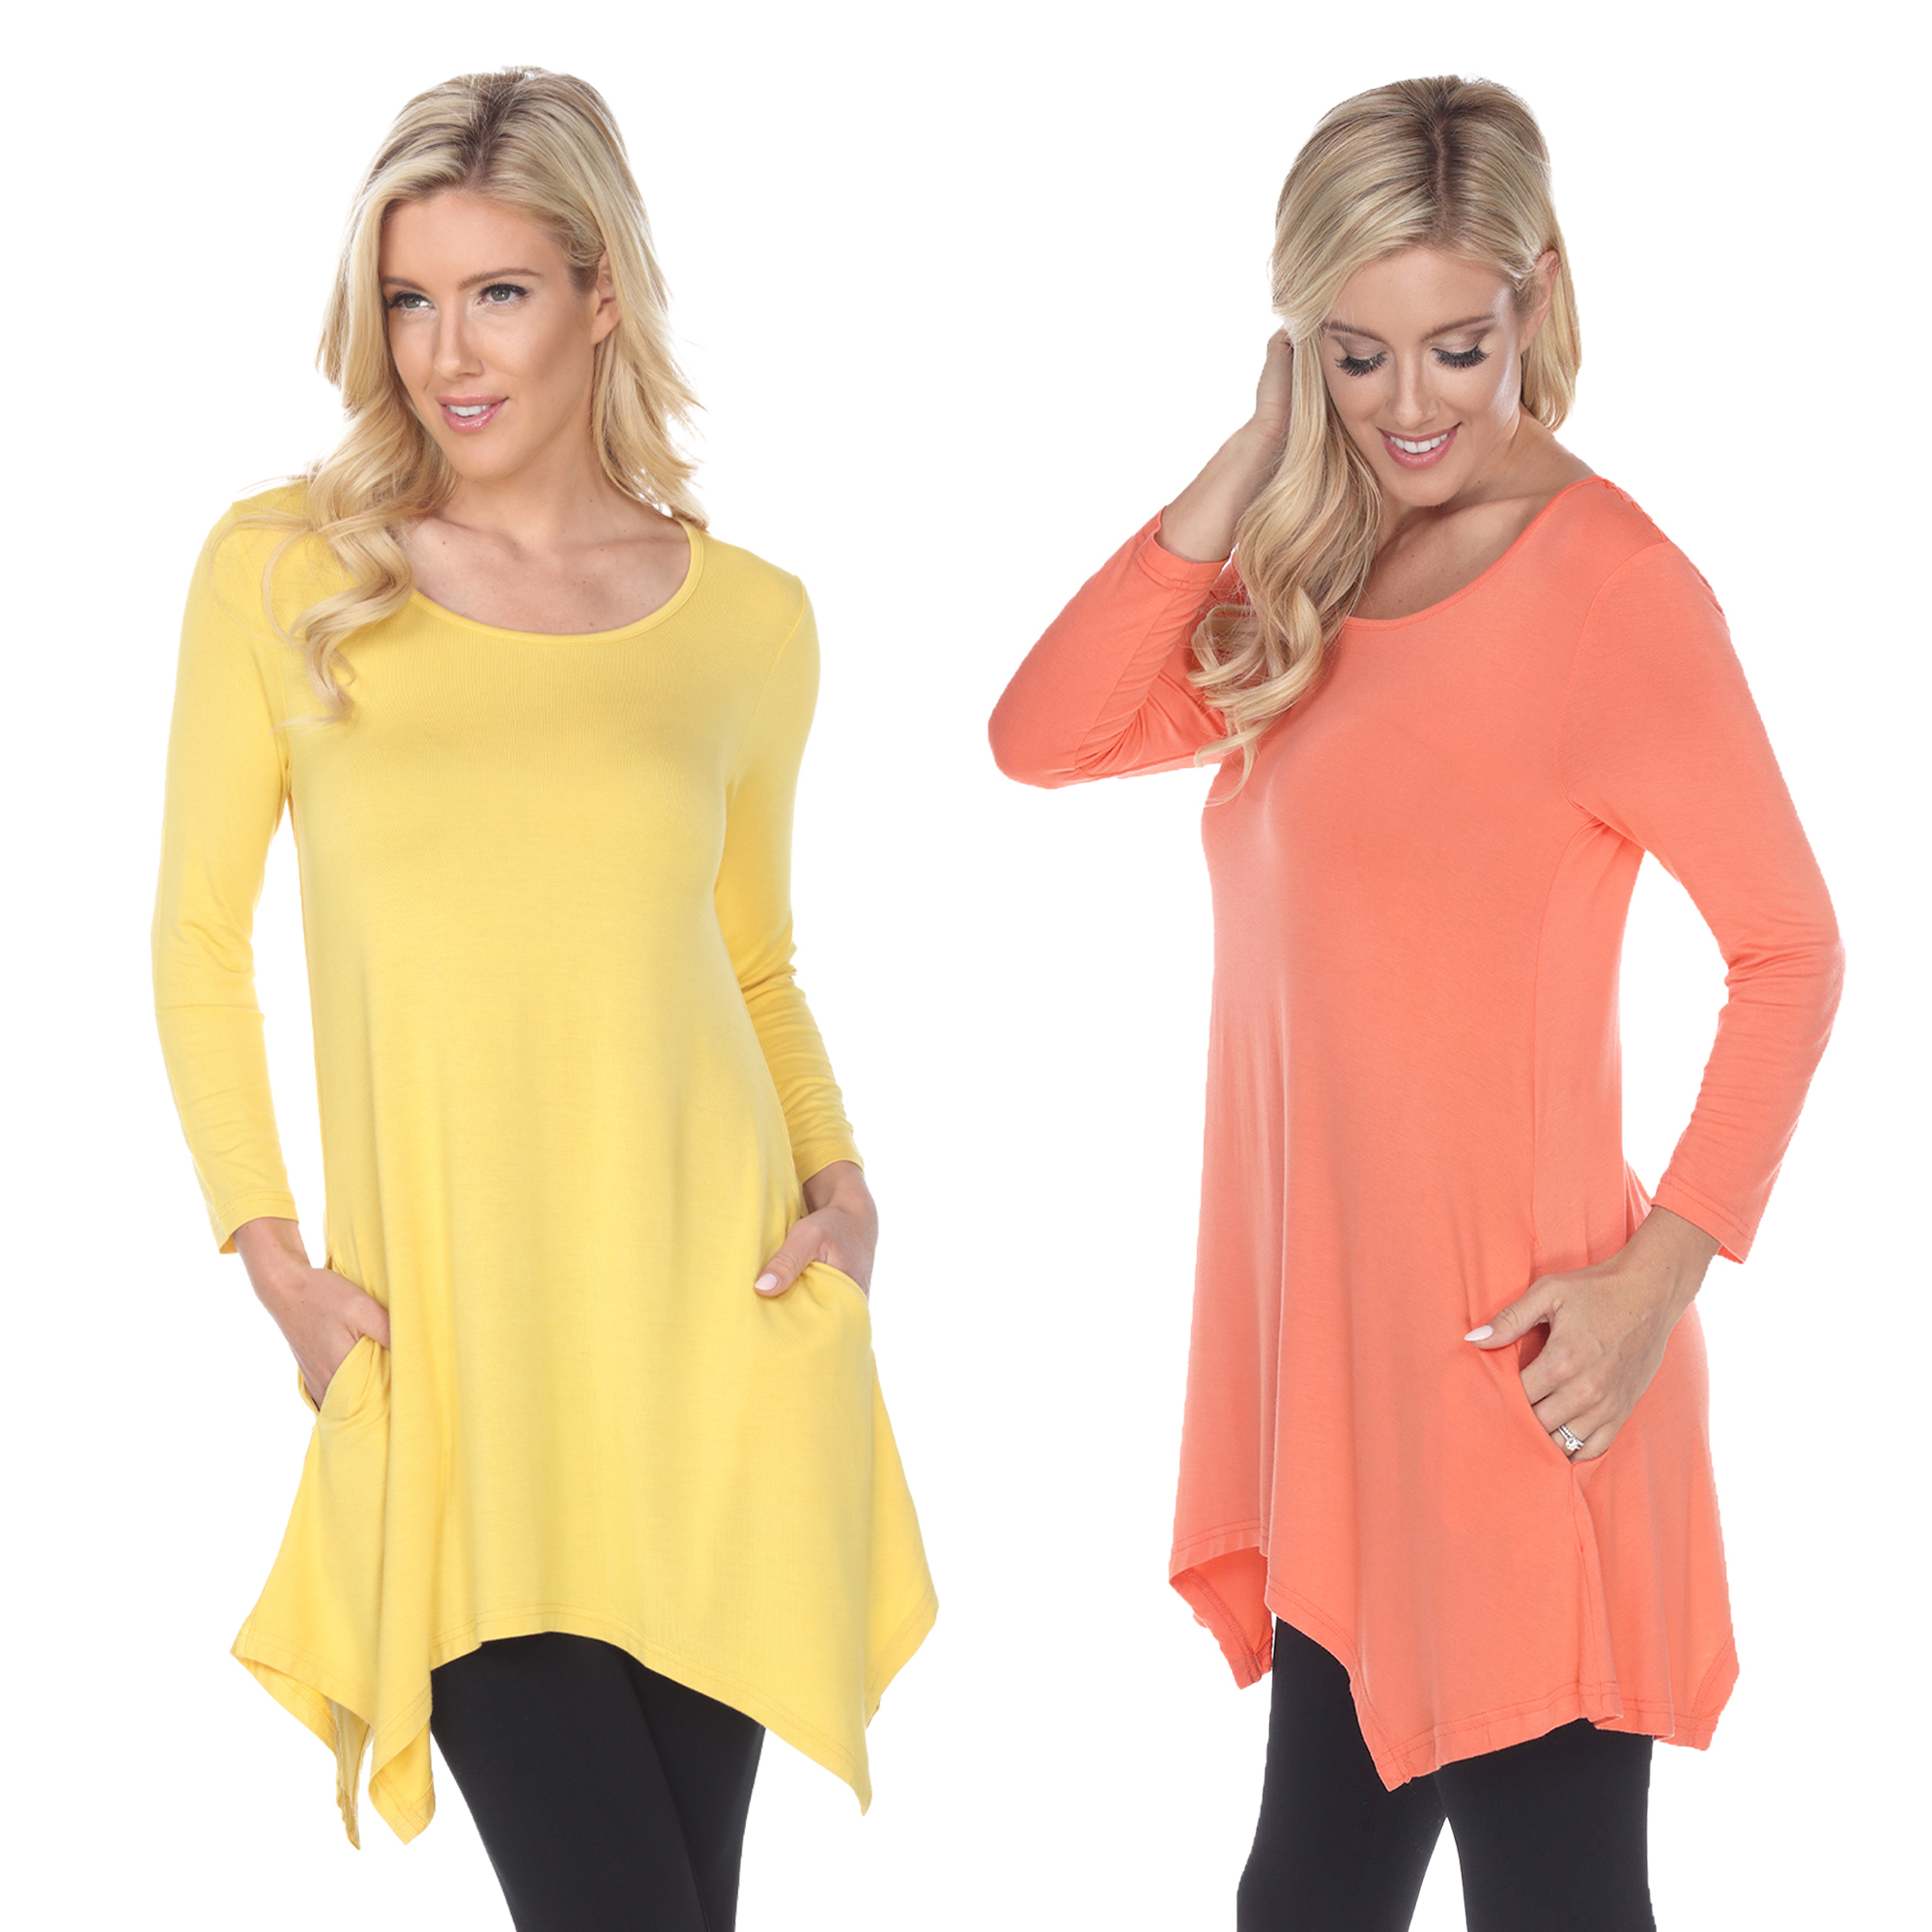 White Mark Women's Pack Of 2 Yellow Tunic Top - Yellow, Coral, X-Large